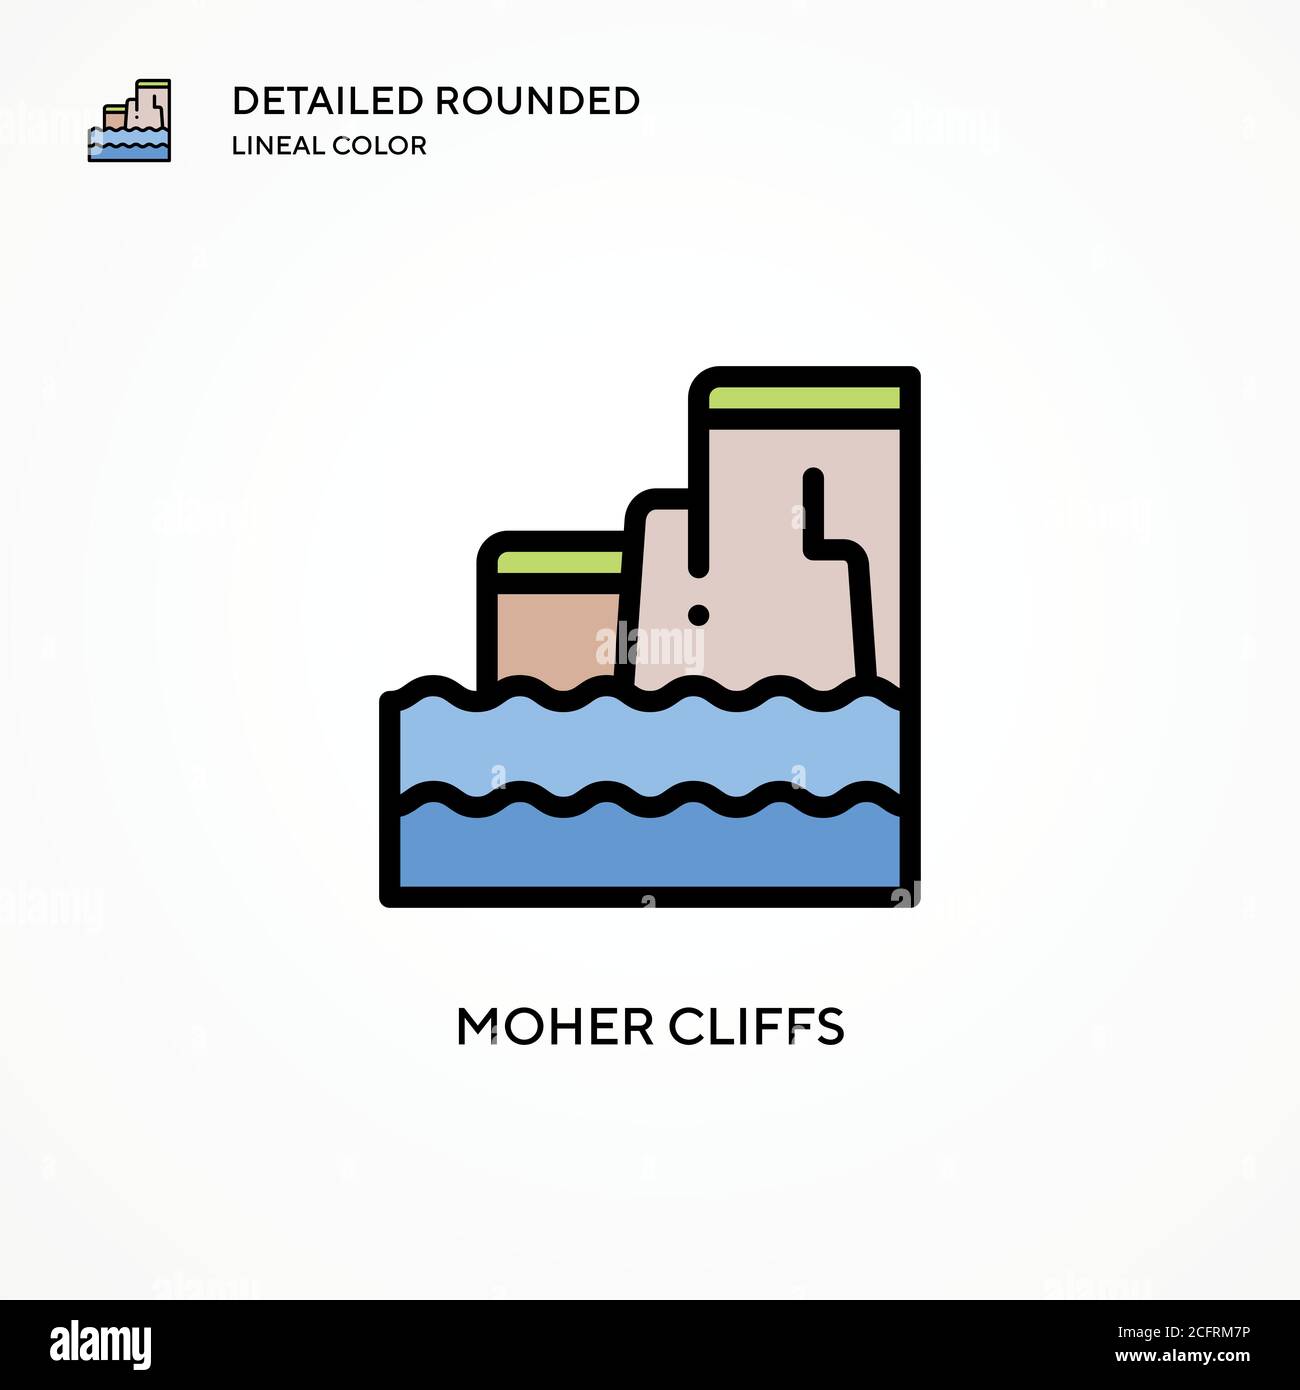 Moher cliffs vector icon. Modern vector illustration concepts. Easy to edit and customize. Stock Vector